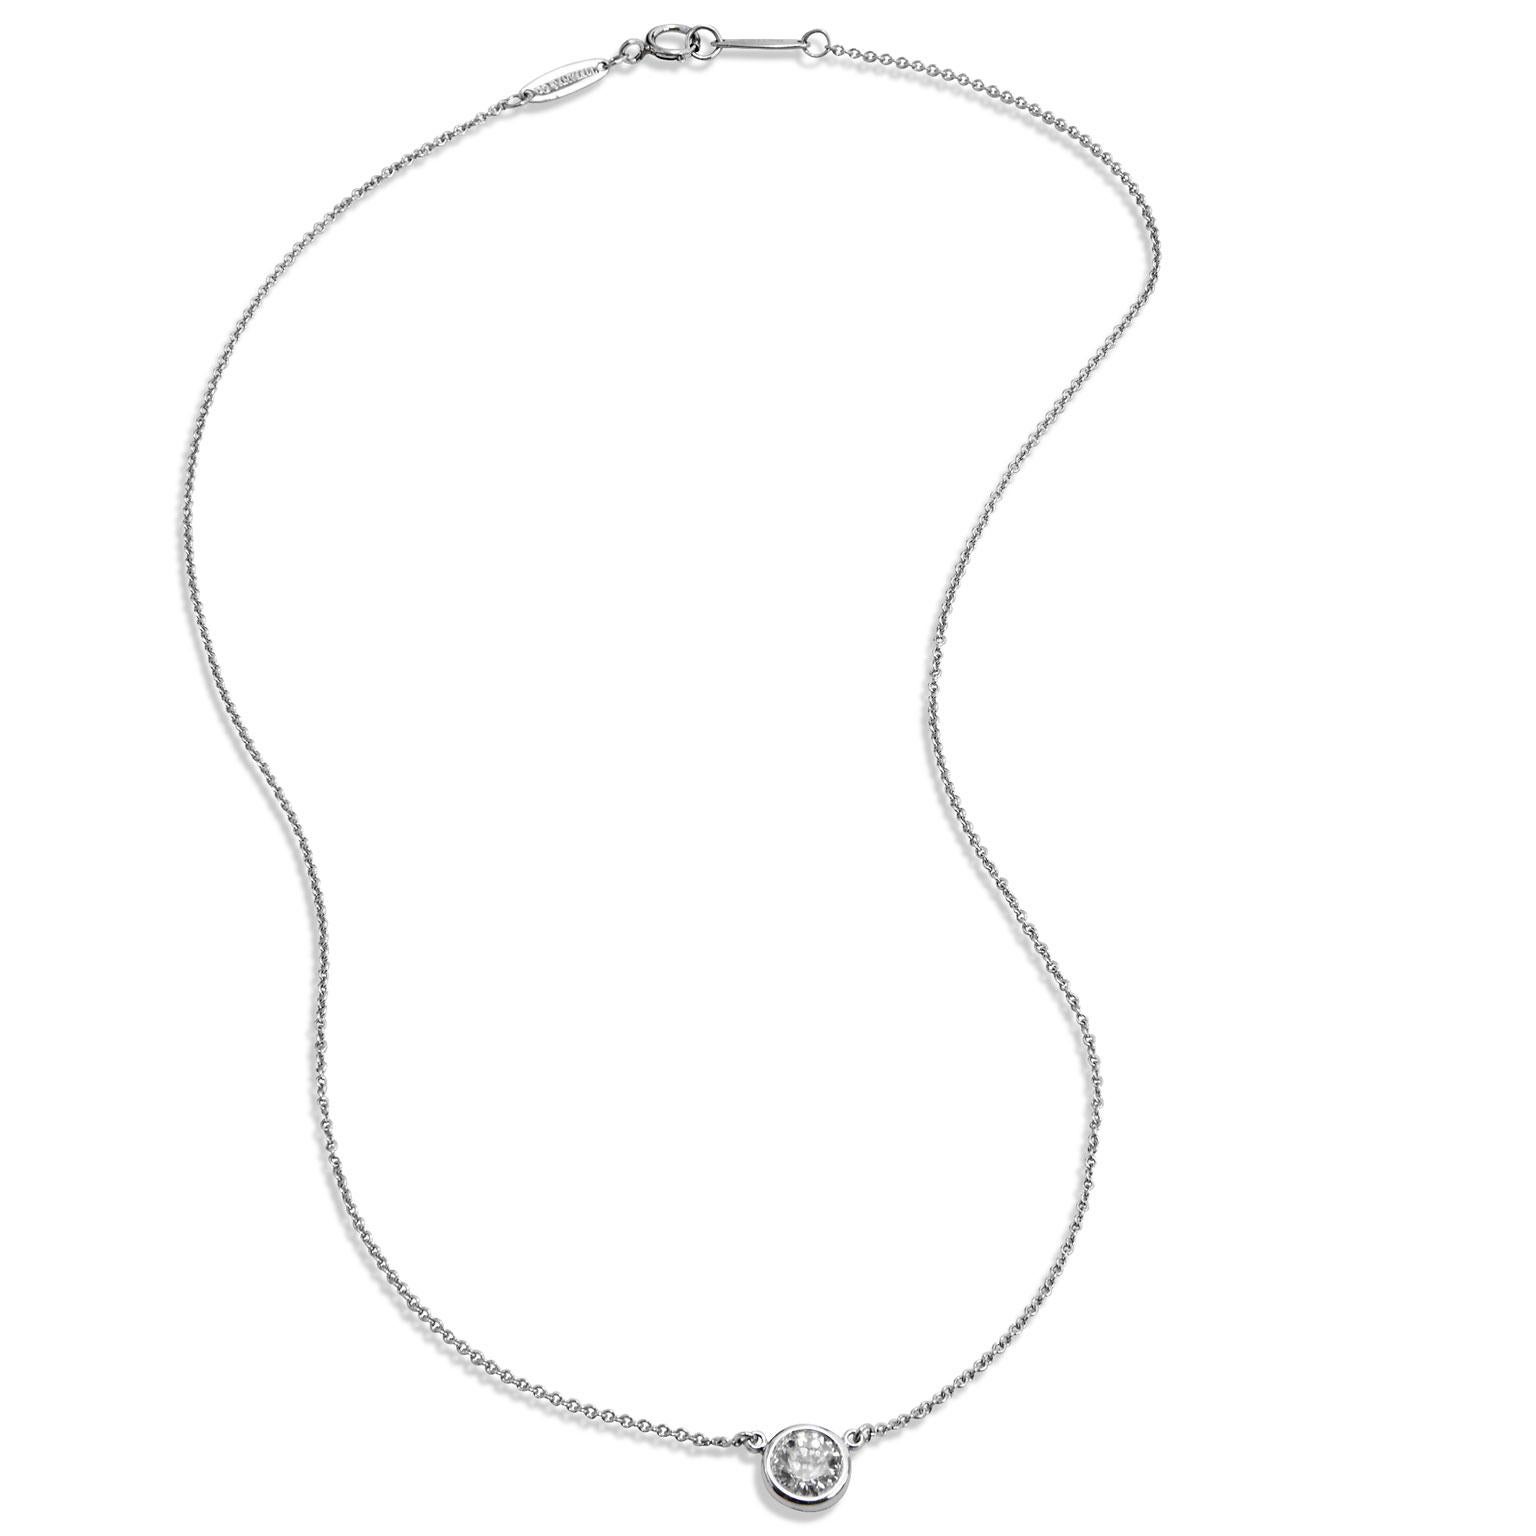 Tiffany & Co. Diamond Pendant necklace by Elsa Peretti

This elegant bezel set diamond solitaire is set in platinum and is made by Tiffany & Co. The designer is Elsa Peretti. The serial number is 26621968. 
The diamond has a total carat weight of